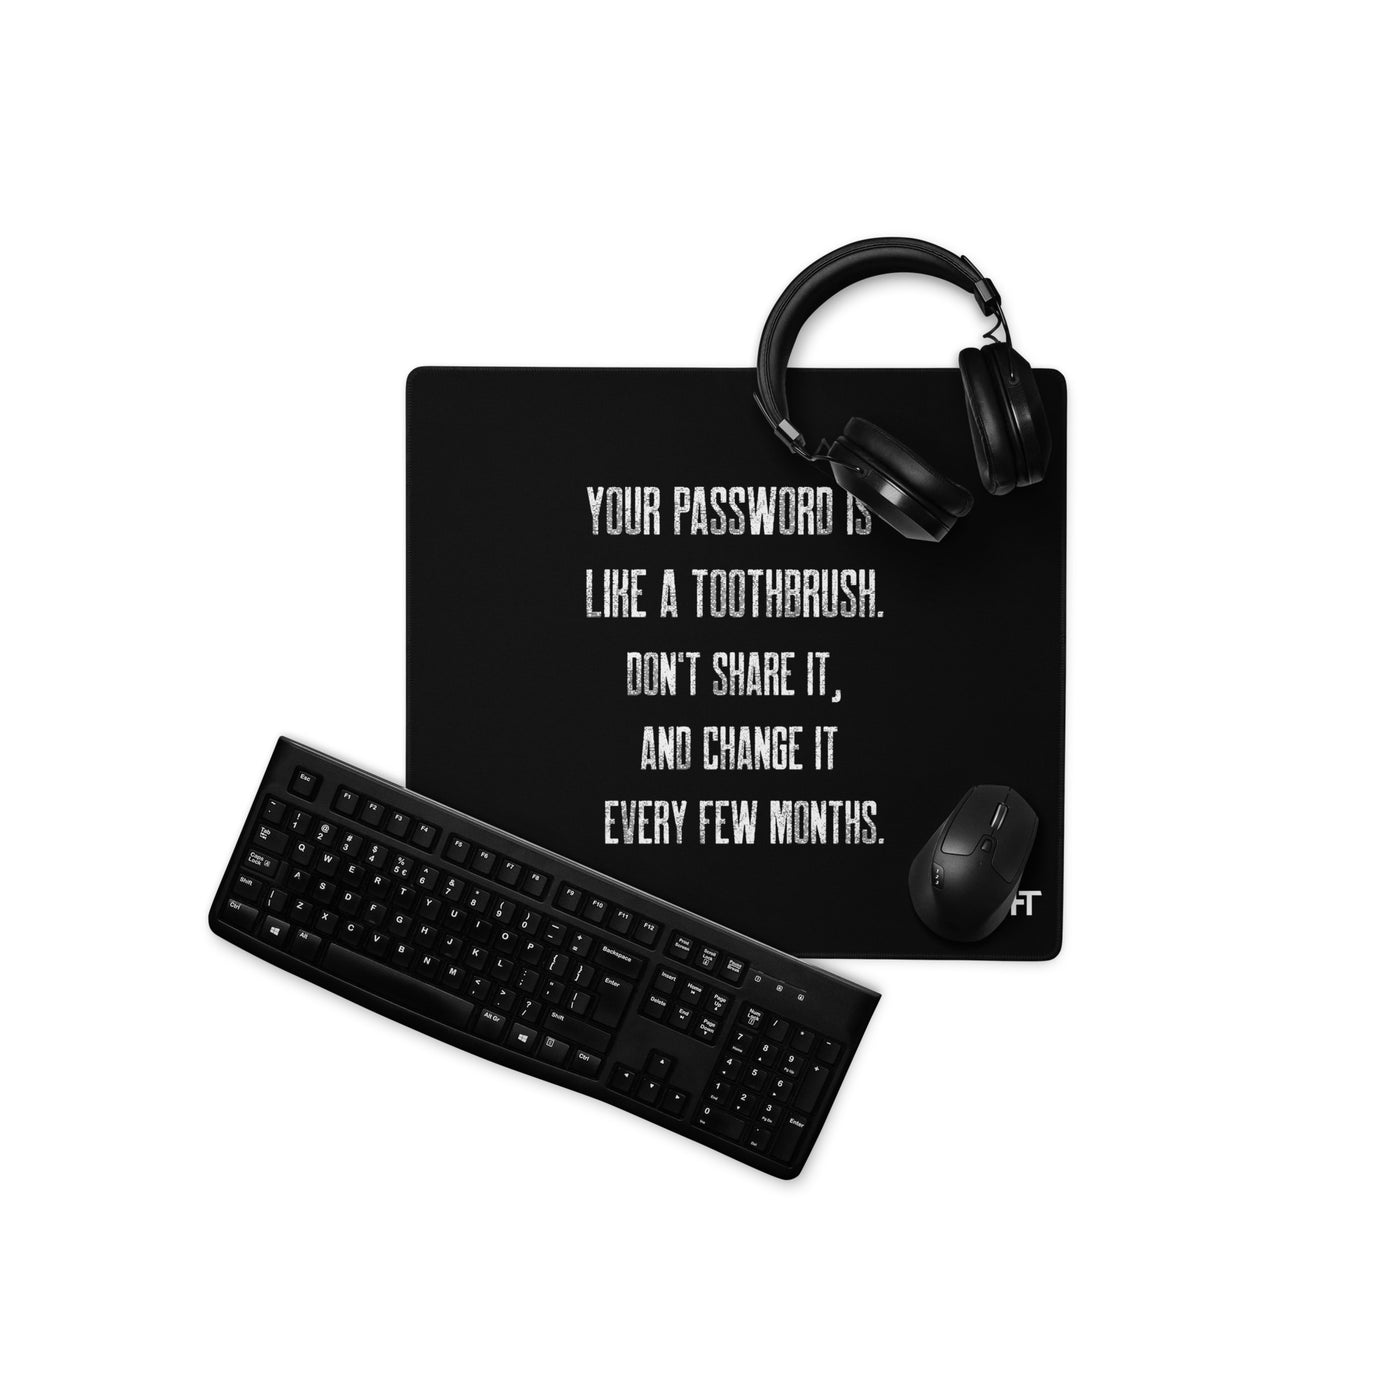 Your password is like a toothbrush V1 - Desk Mat